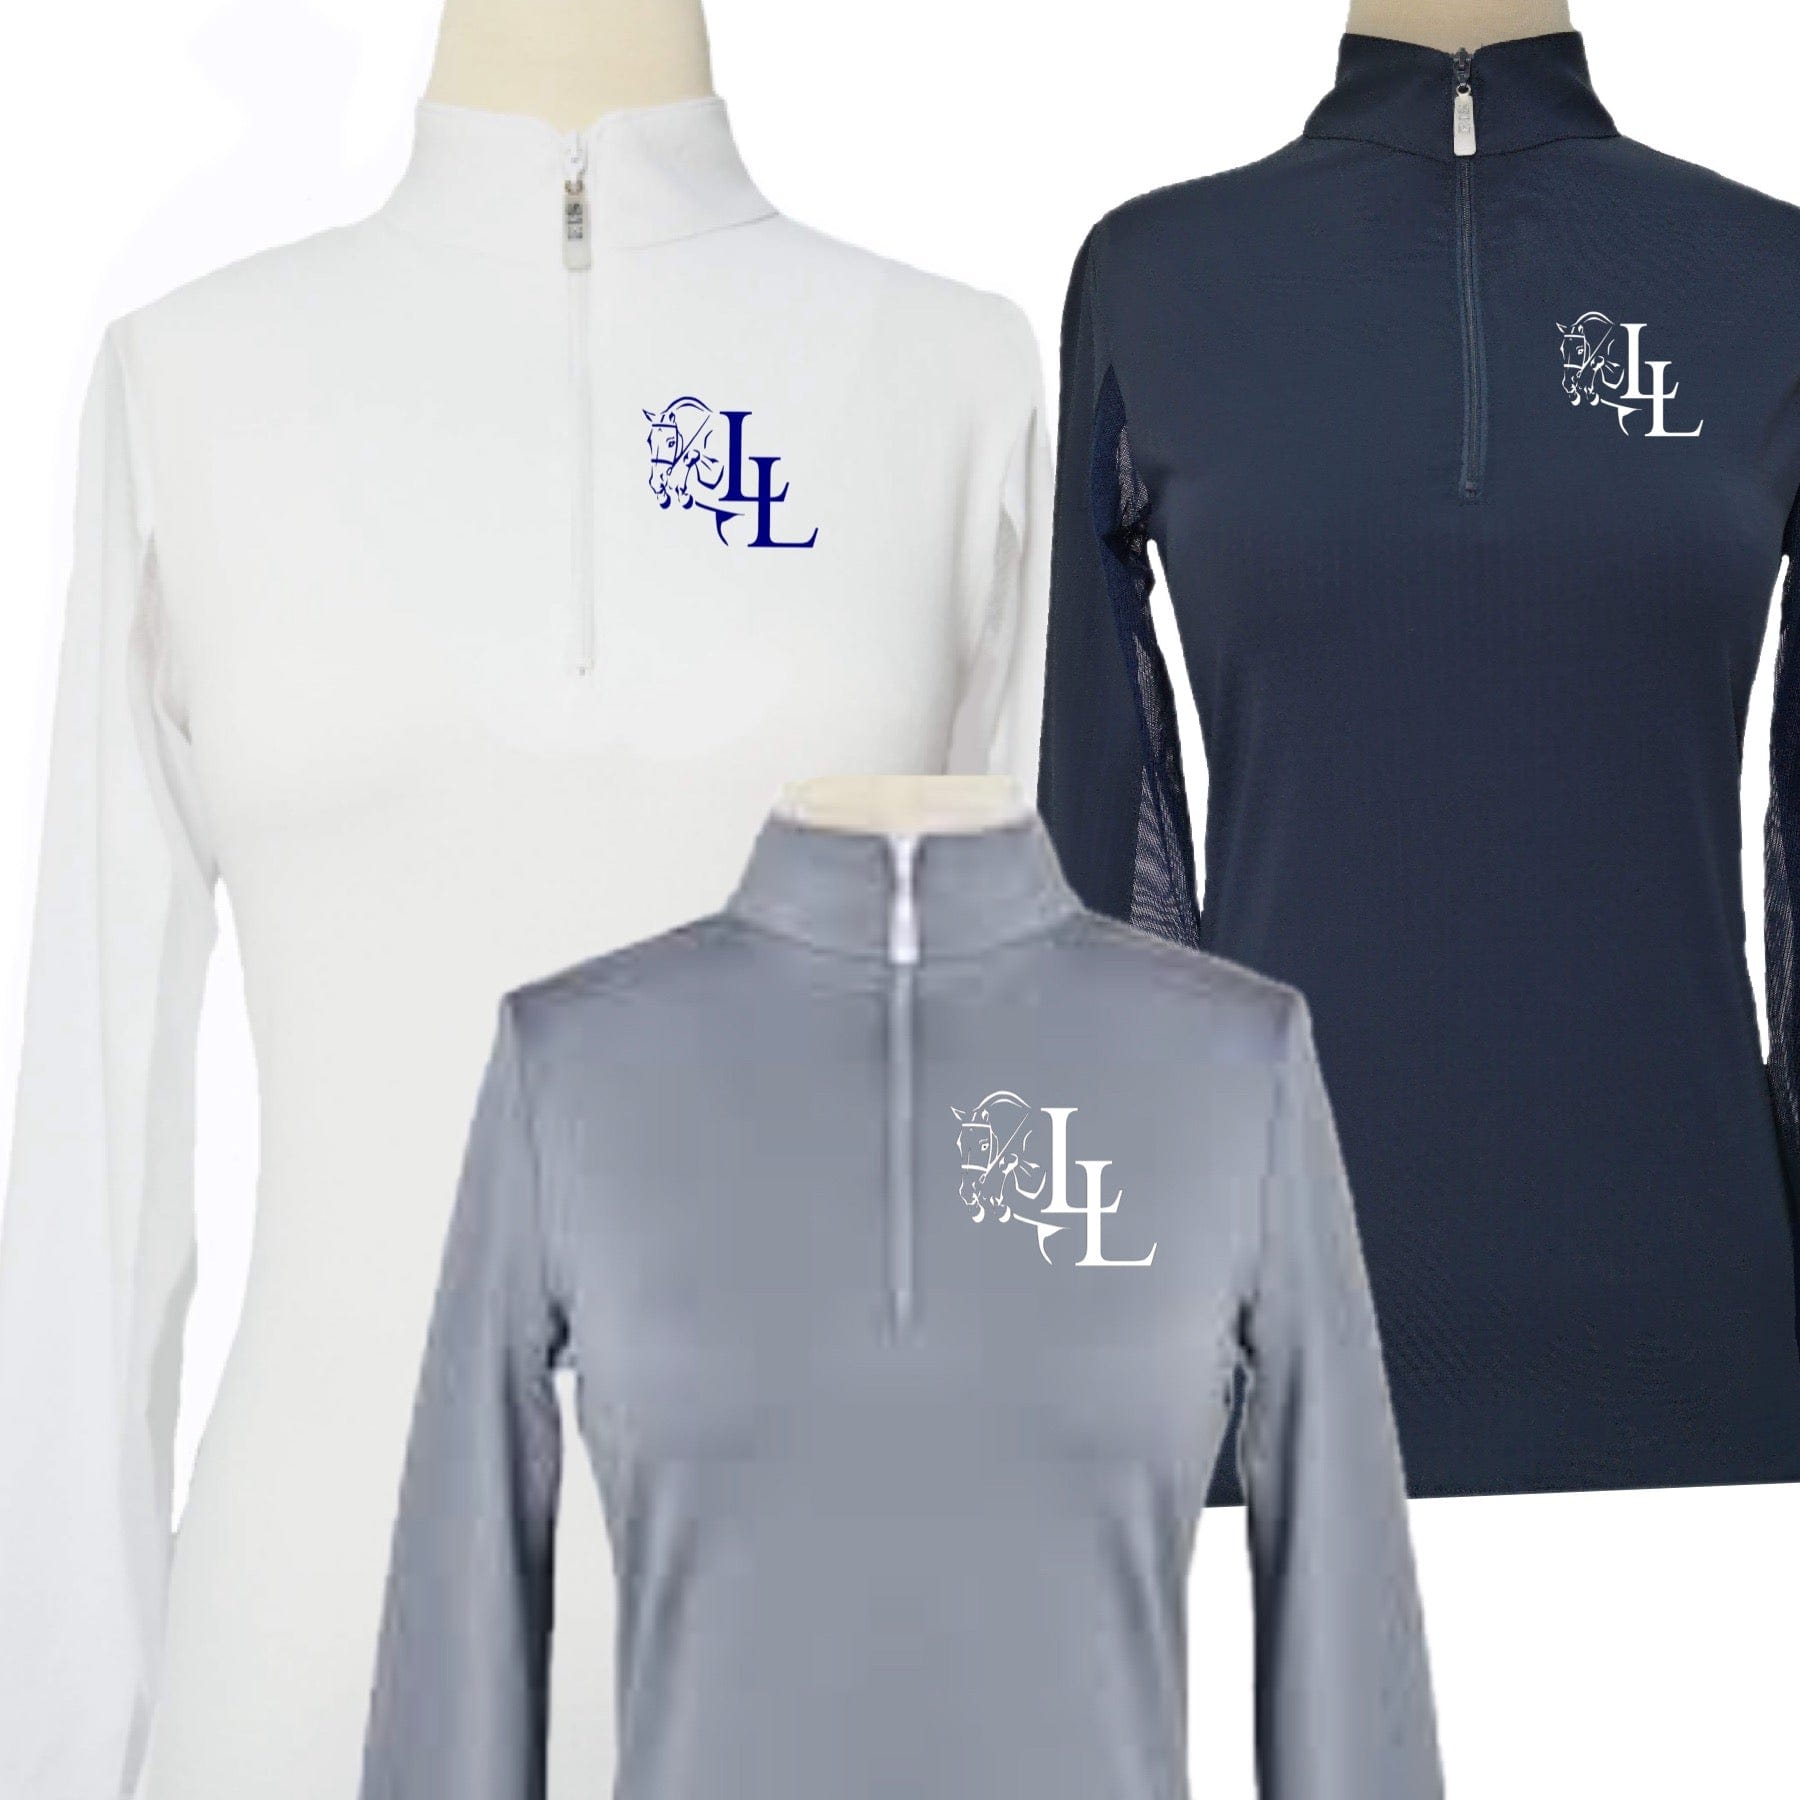 Equestrian Team Apparel Double L Stables Sun Shirt equestrian team apparel online tack store mobile tack store custom farm apparel custom show stable clothing equestrian lifestyle horse show clothing riding clothes horses equestrian tack store